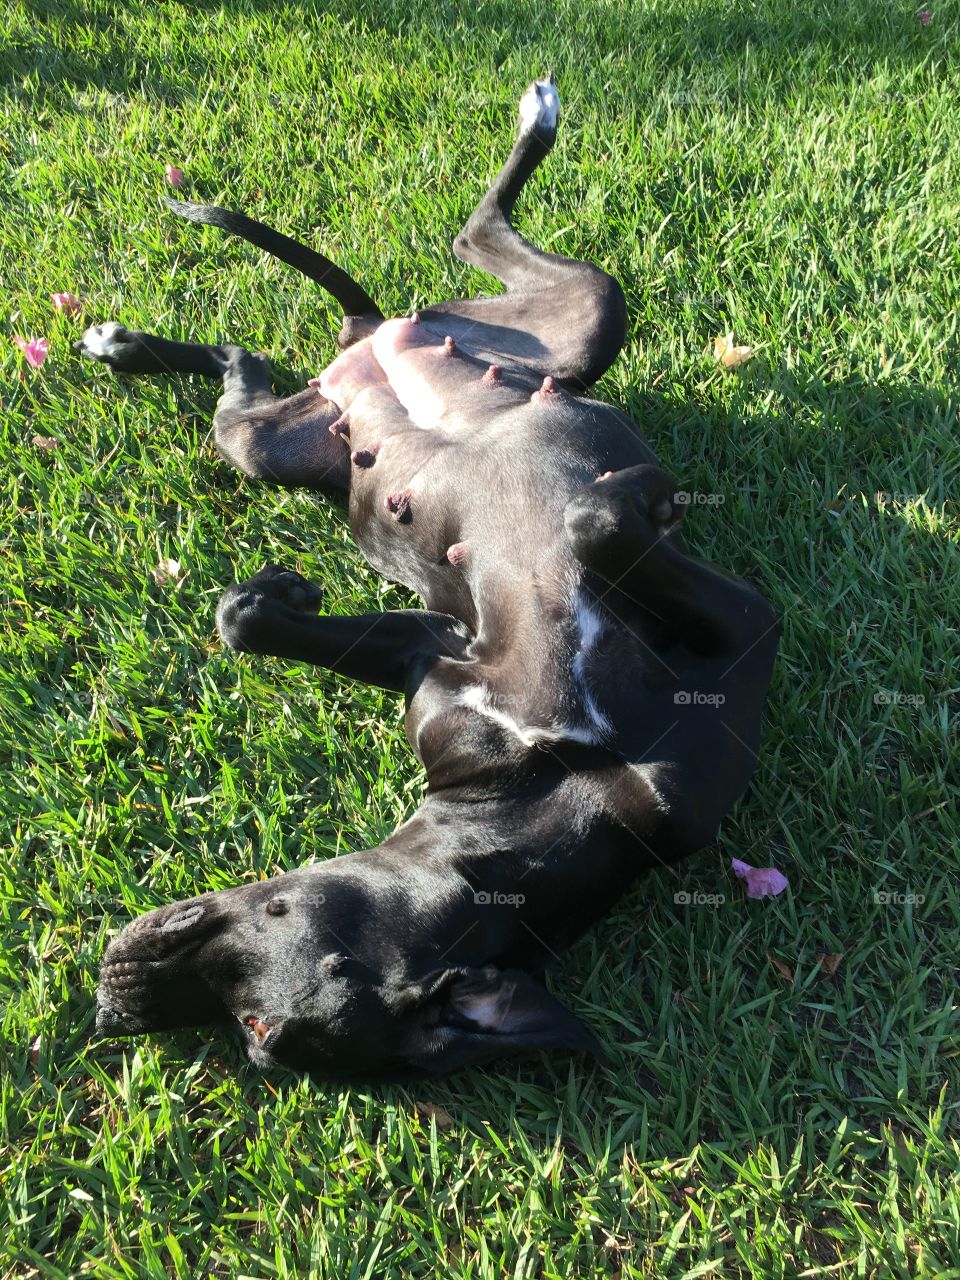 Stretching out on the grass in the morning sun.